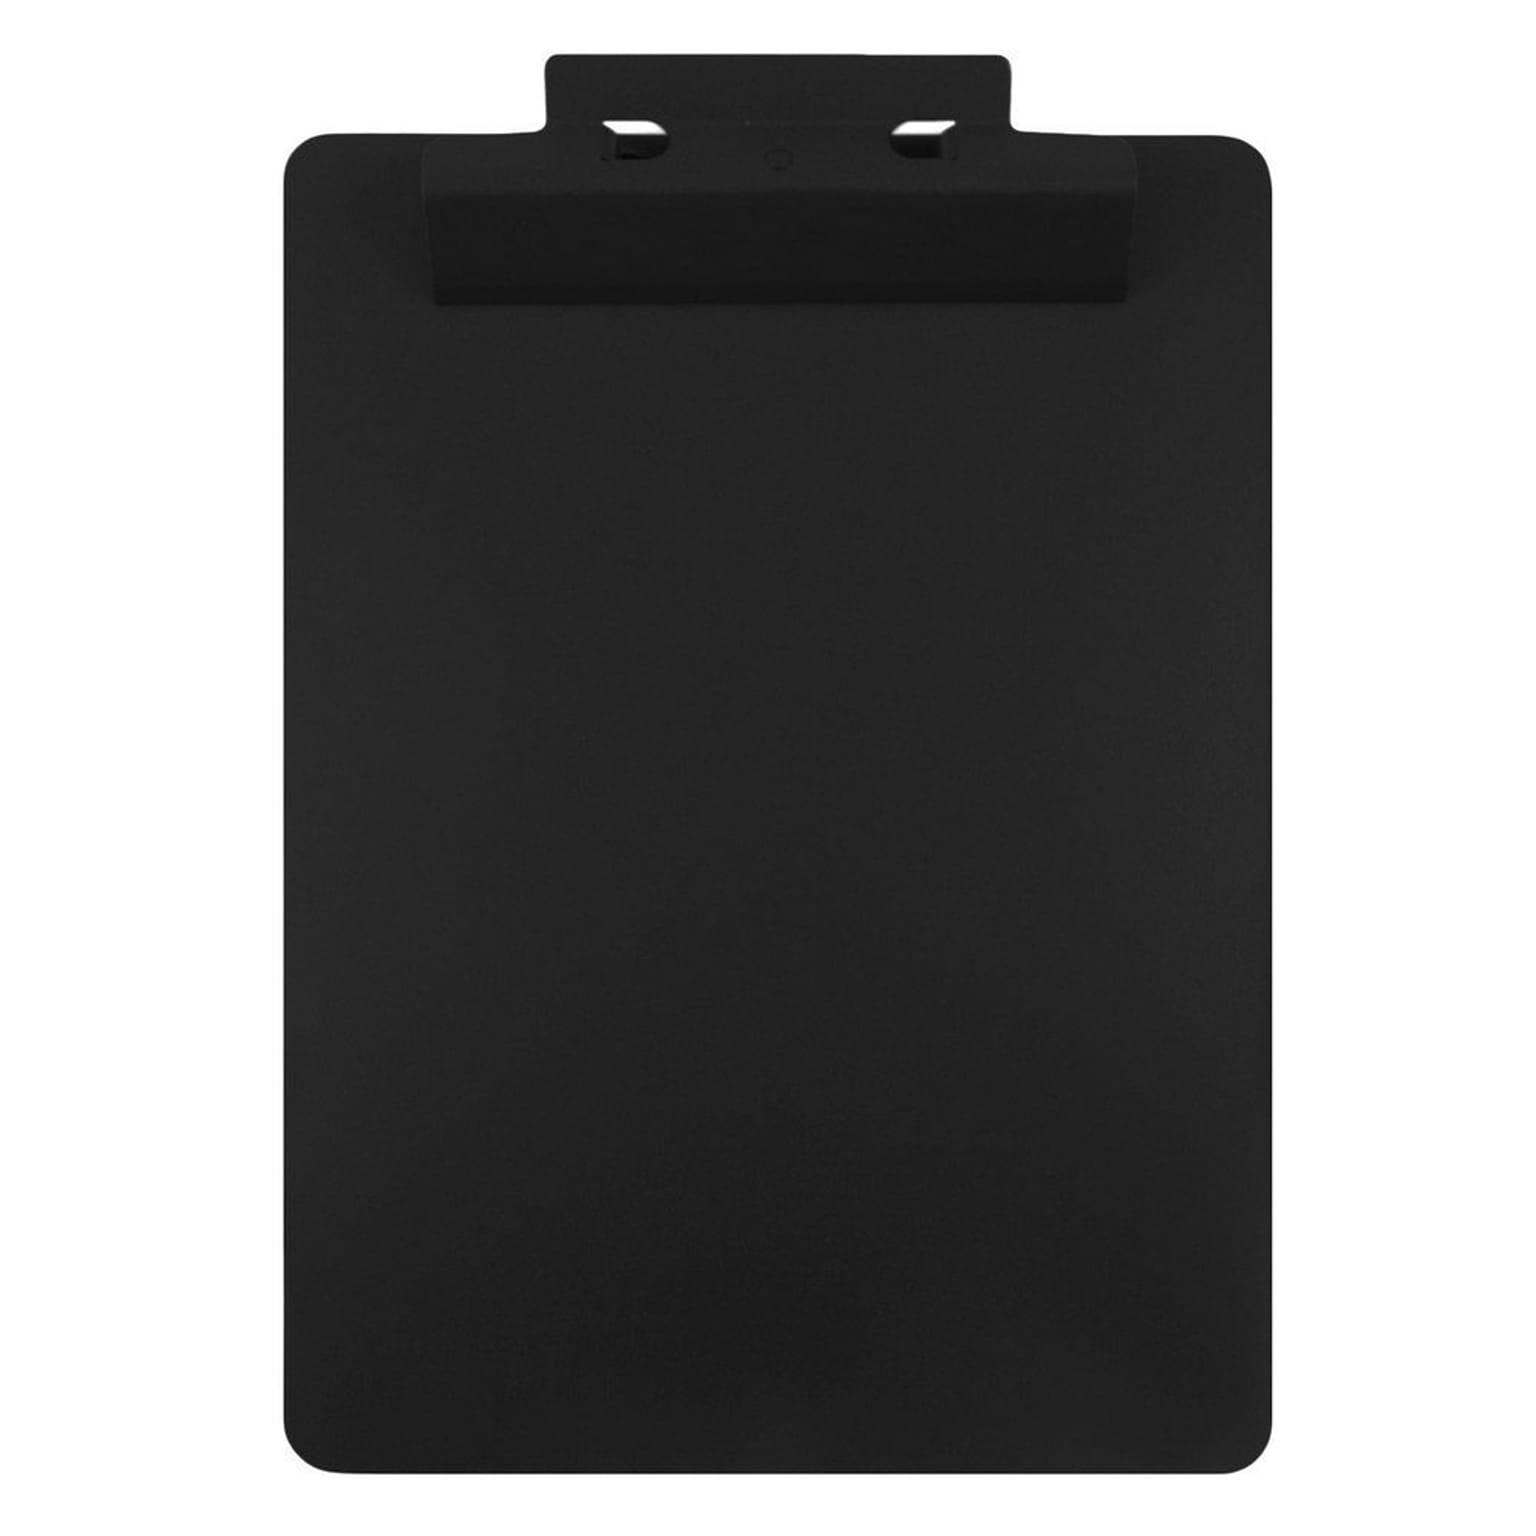 JAM Paper® Aluminum Premium Clipboard with Hinge, Letter Size, 9 x 12 1/2, Black Clip Board, Sold Individually (340933560)